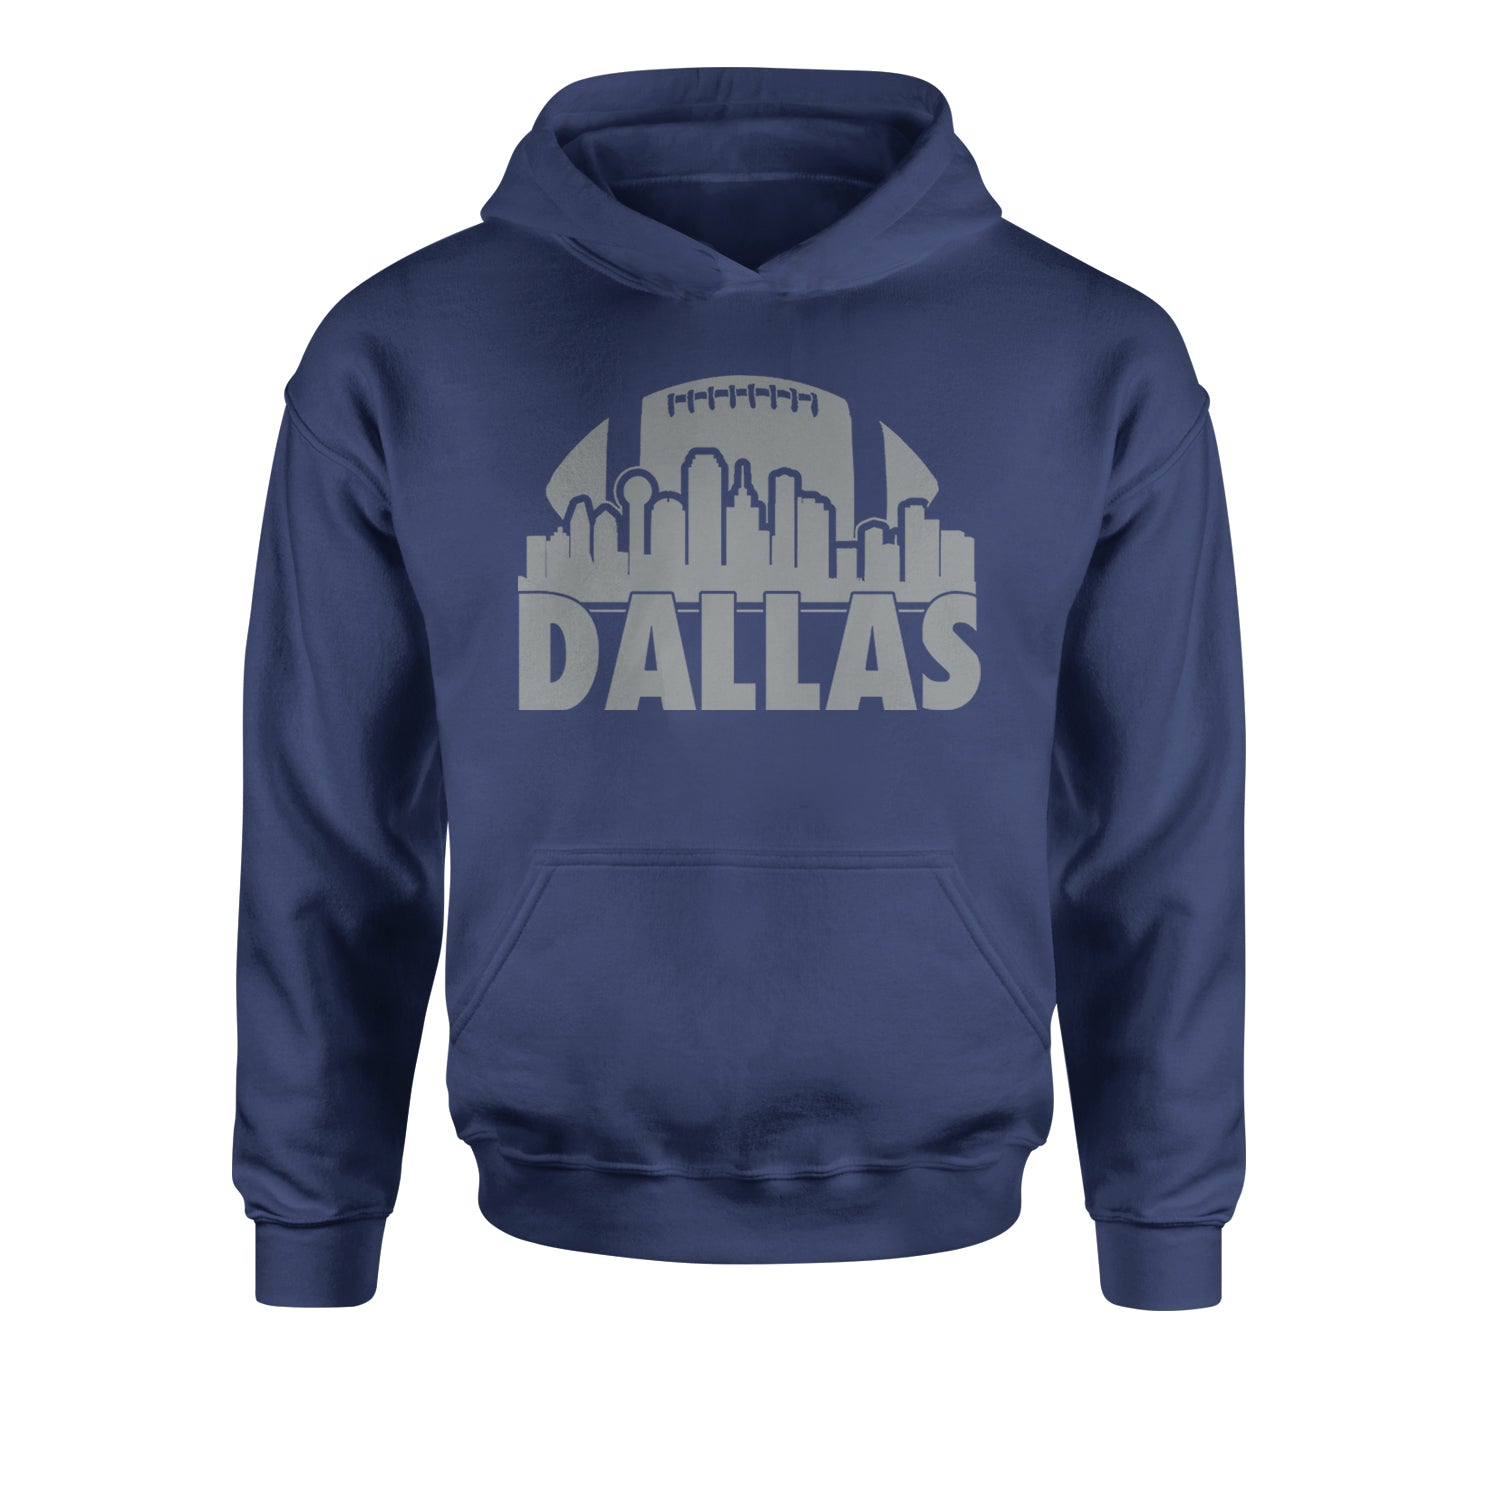 Dallas Texas Skyline Youth-Sized Hoodie dallas, Texas by Expression Tees